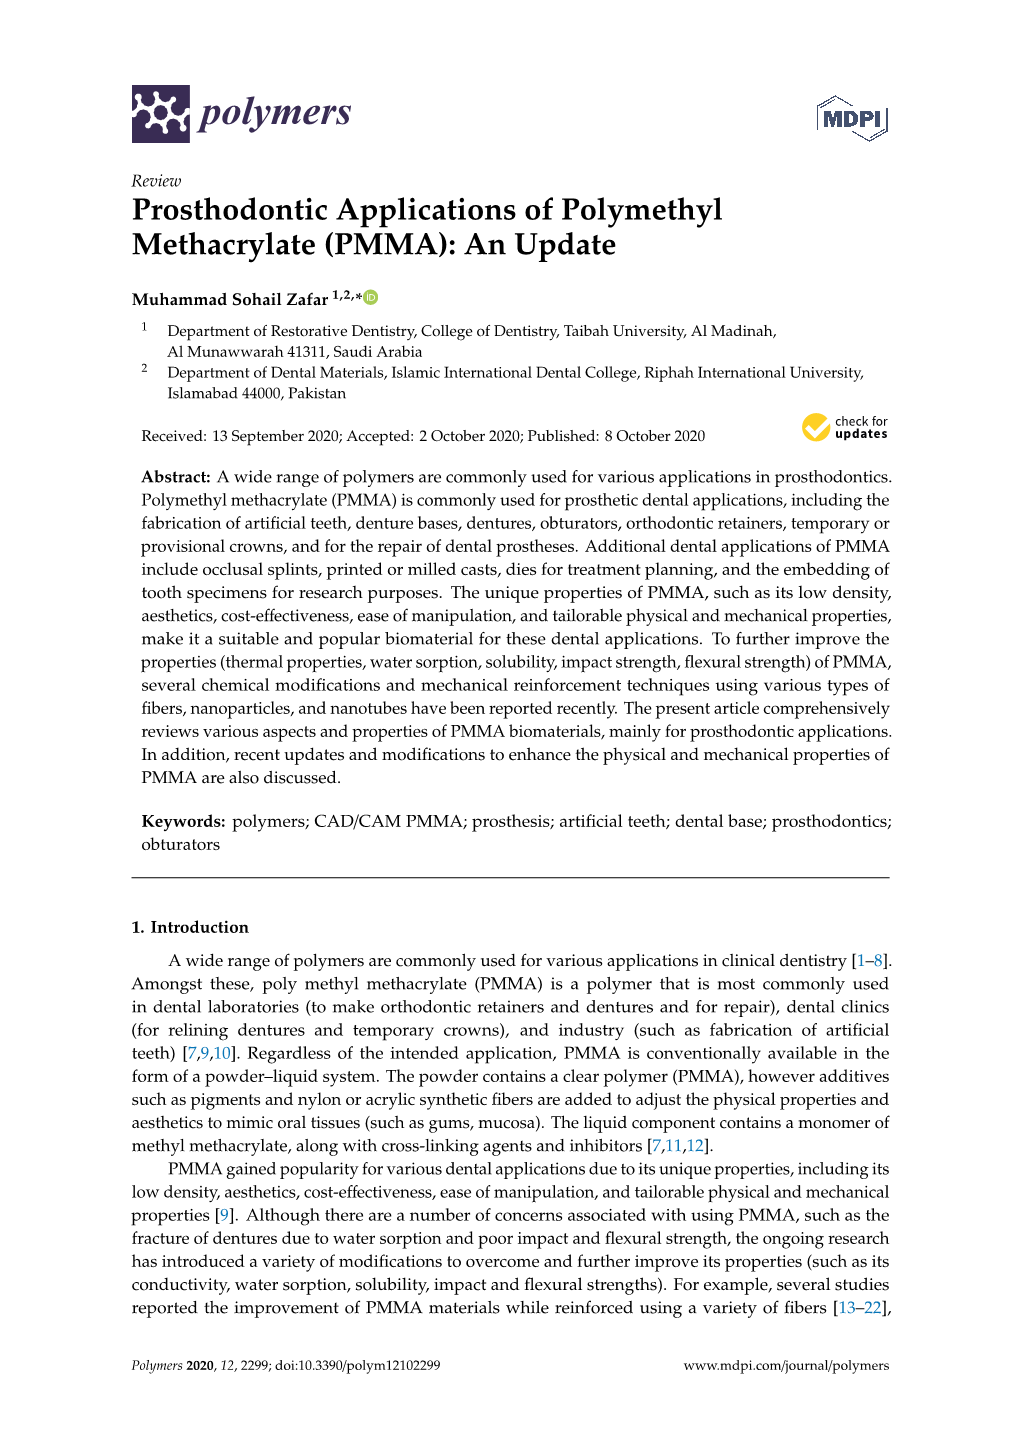 Prosthodontic Applications of Polymethyl Methacrylate (PMMA): an Update